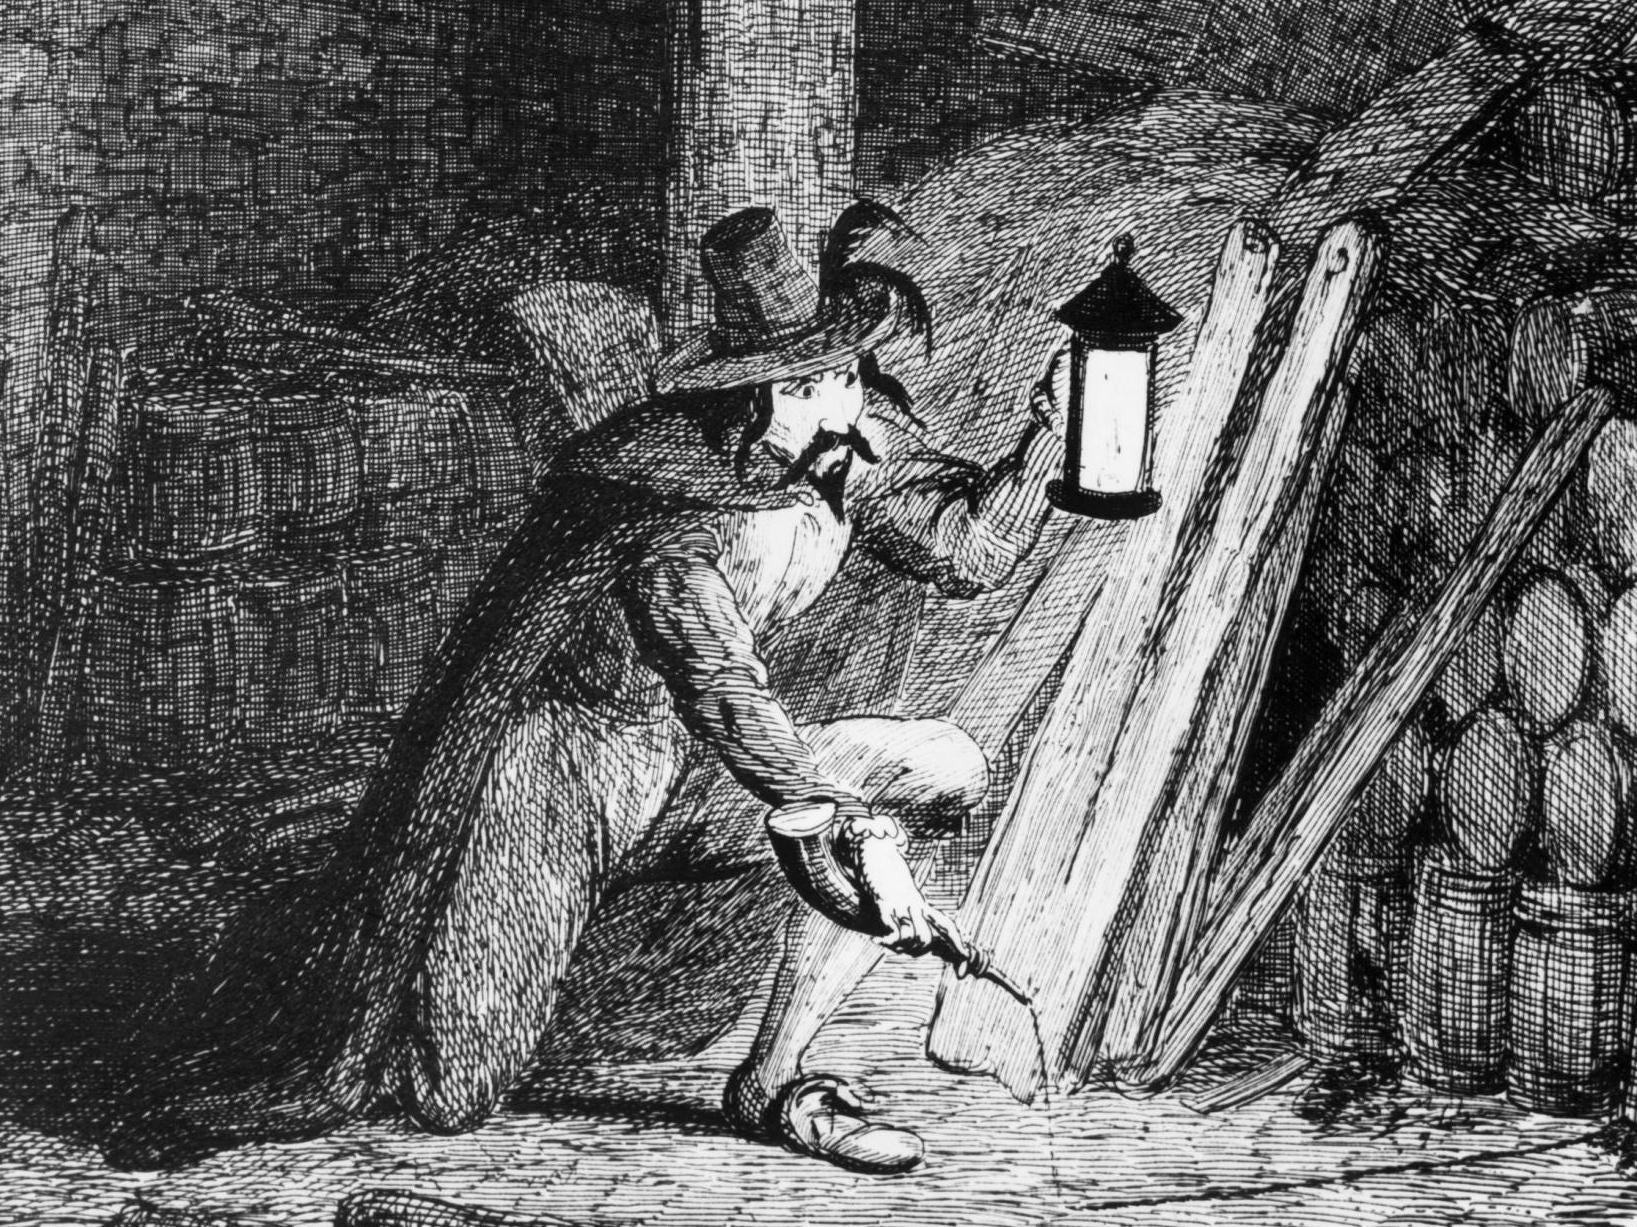 Guy Fawkes attempts to plant gunpowder in the cellar of the Palace of Westminster in an engraving by George Cruikshank